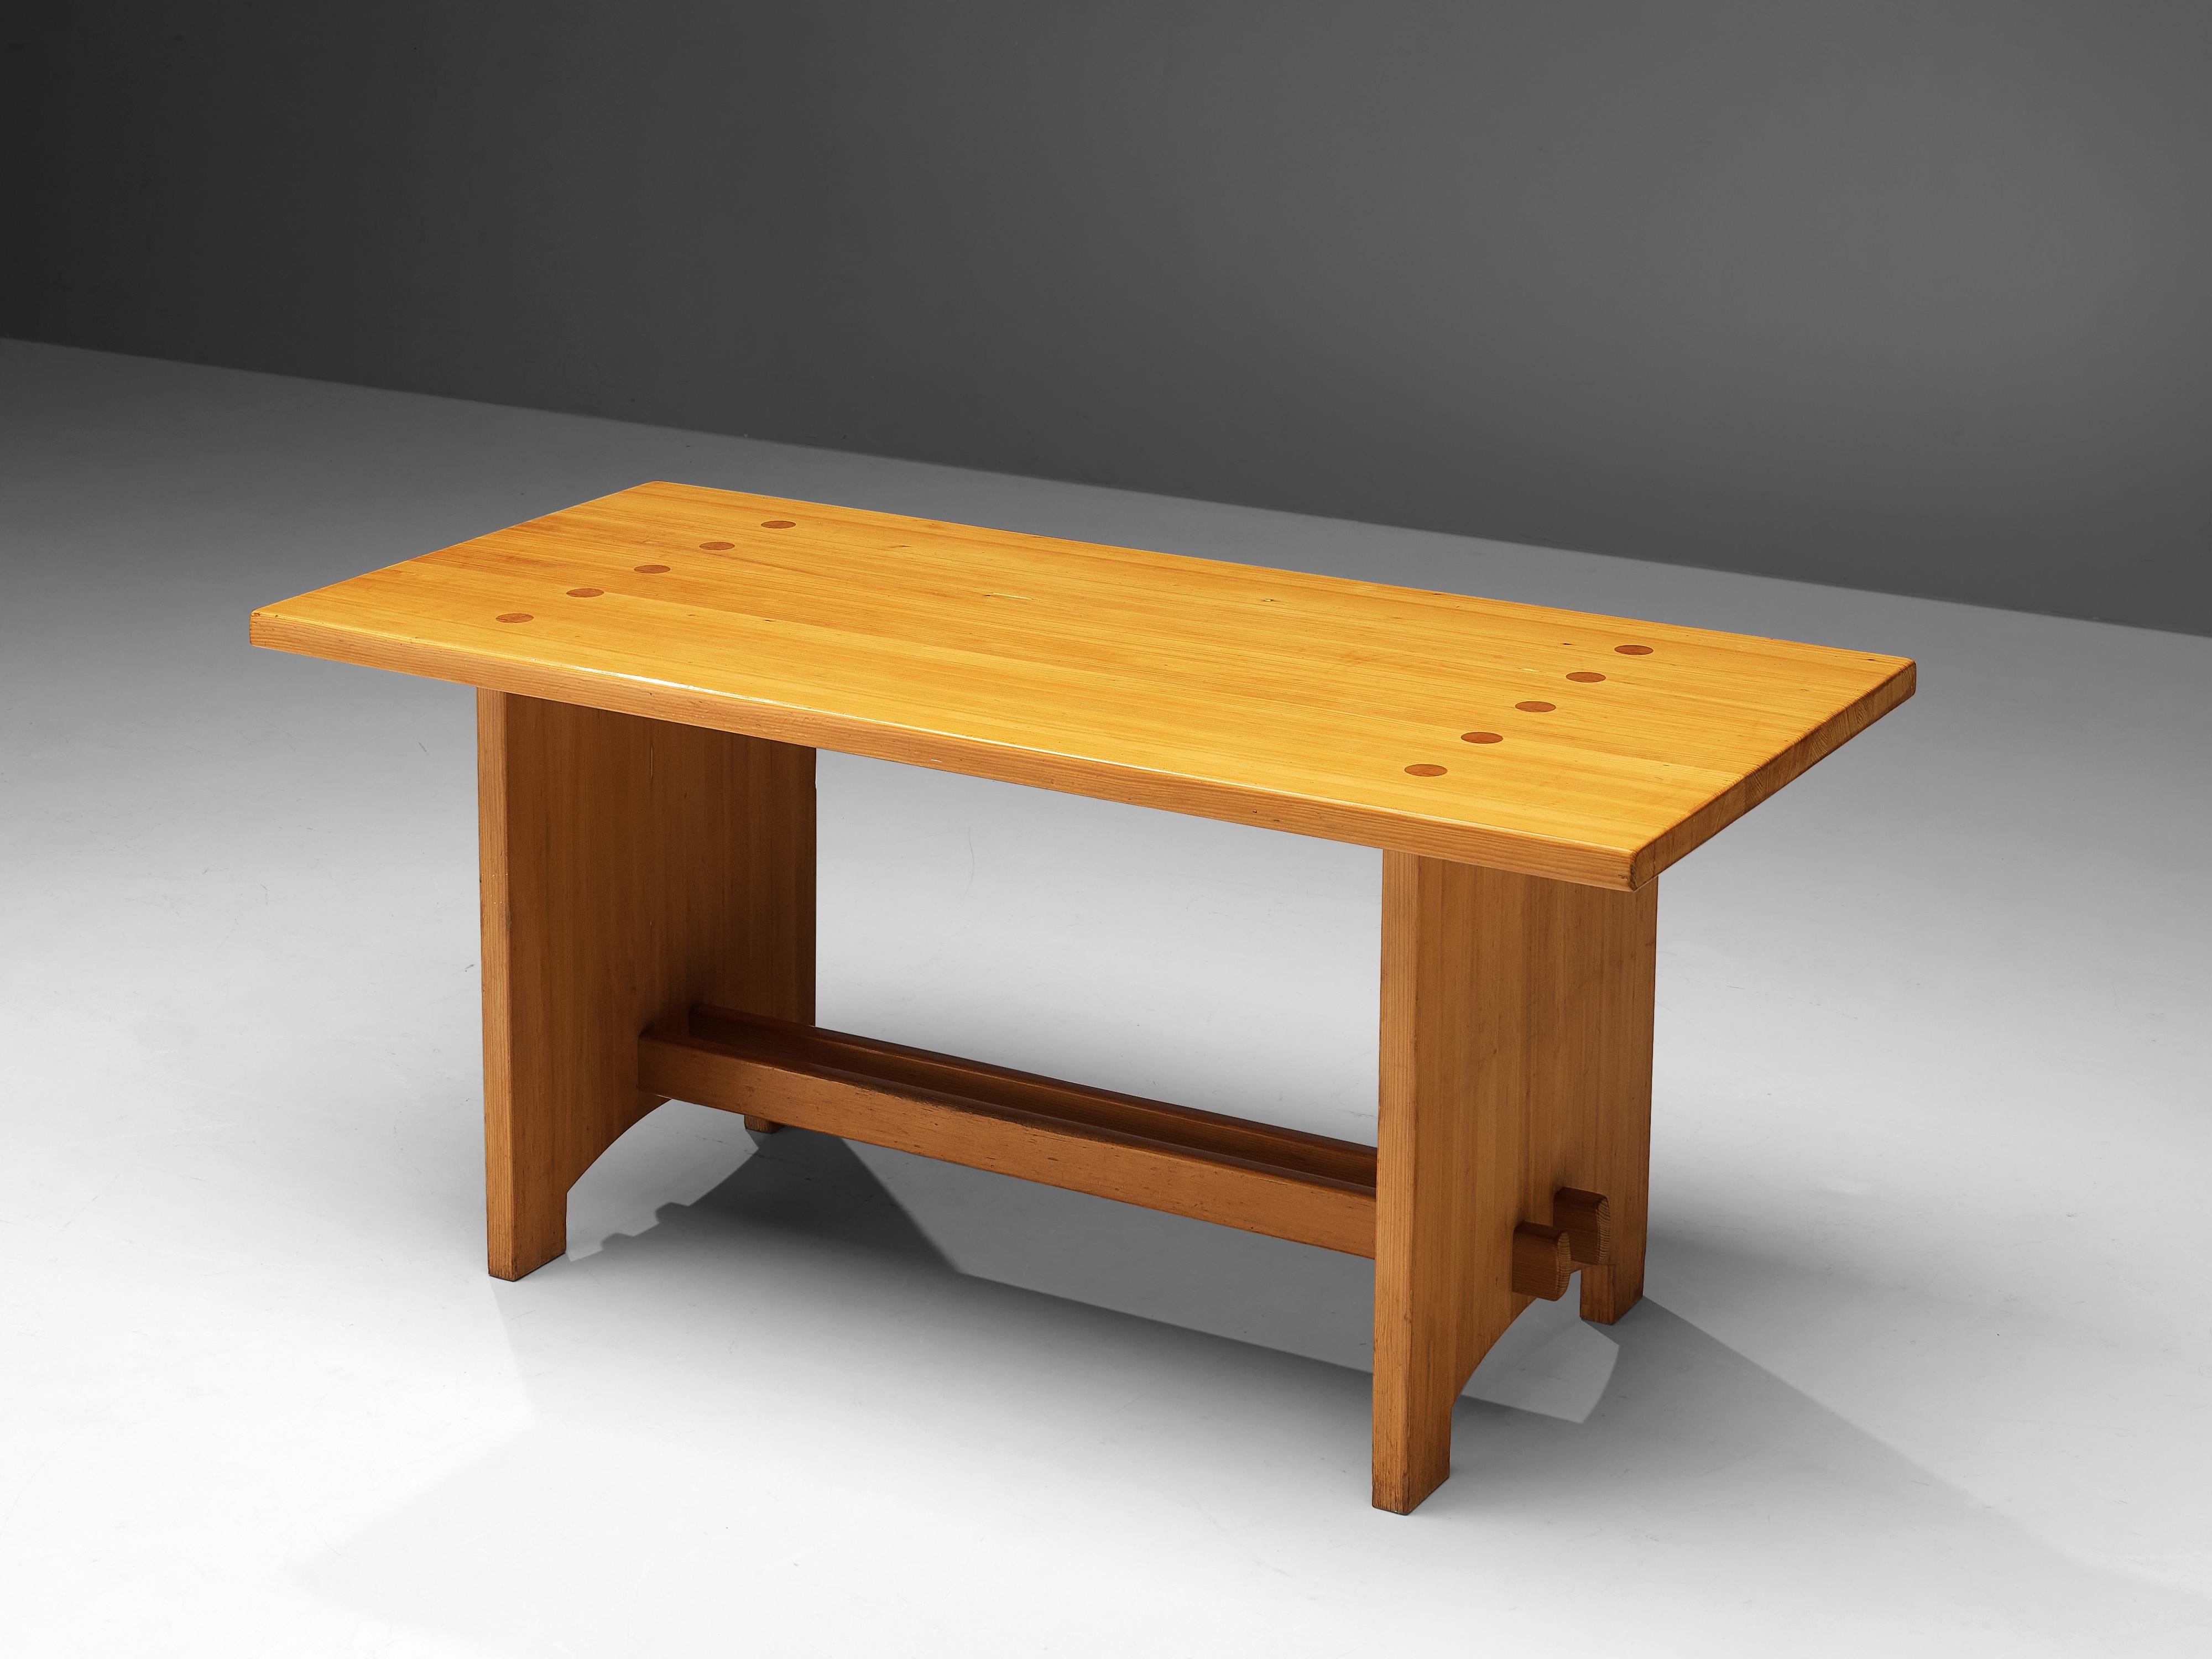 Jacob Kielland-Brandt, dining table, solid pine, Denmark, 1960s.

This remarkable table holds a natural expression due to the pine’s properties featuring grains and knots. The table has an open look and is structurally supported by means of a